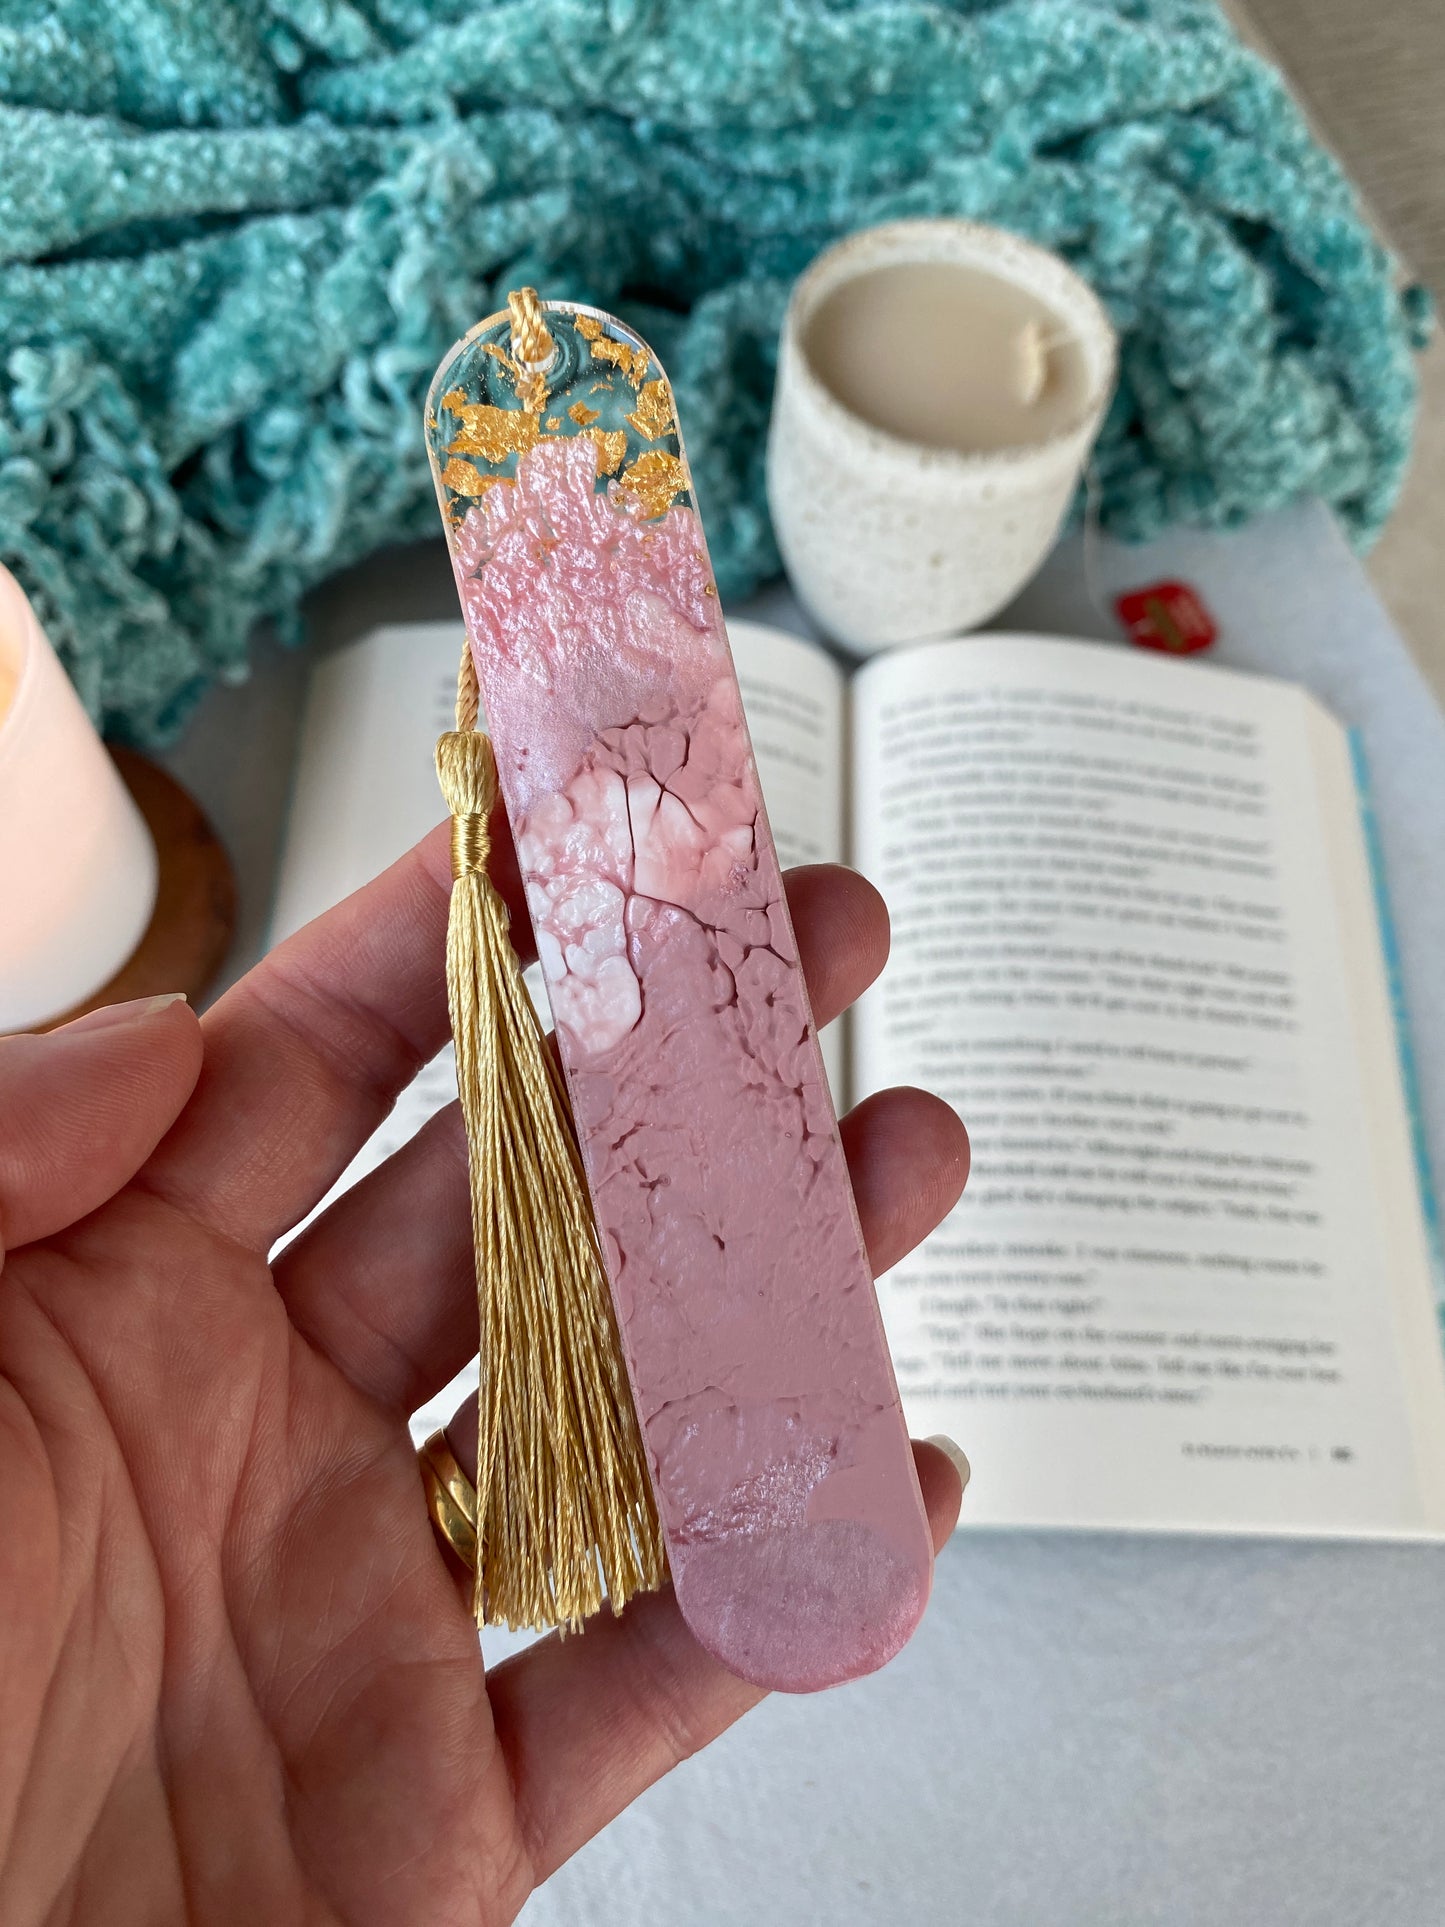 BOOKMARK - created in blush pink resin with gold flakes